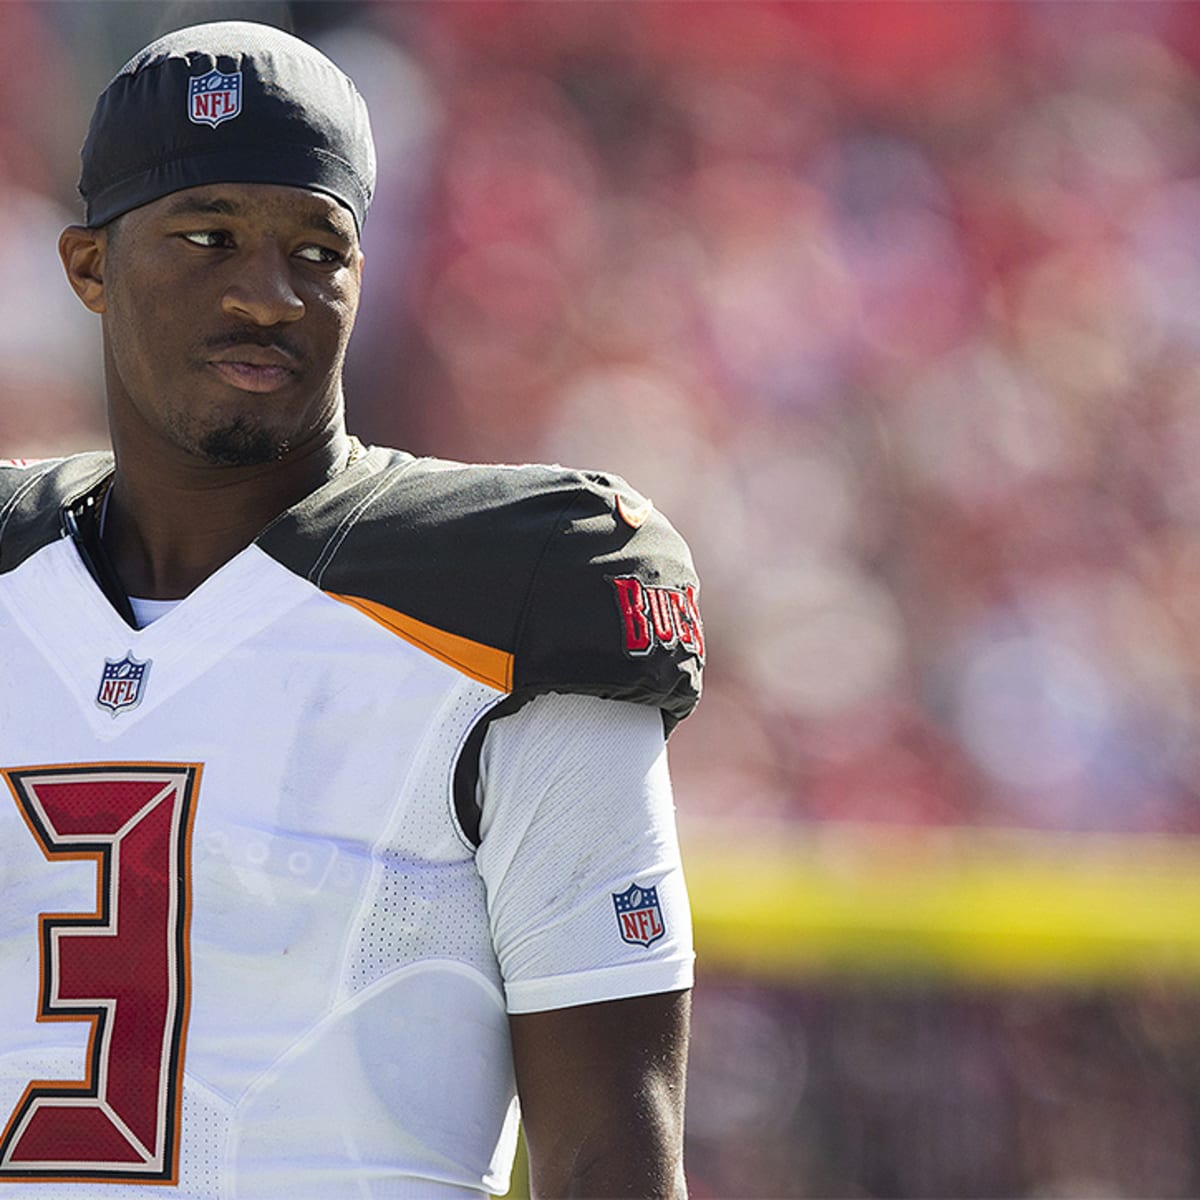 The good, the bad, the win for Bucs' Jameis Winston over the Colts